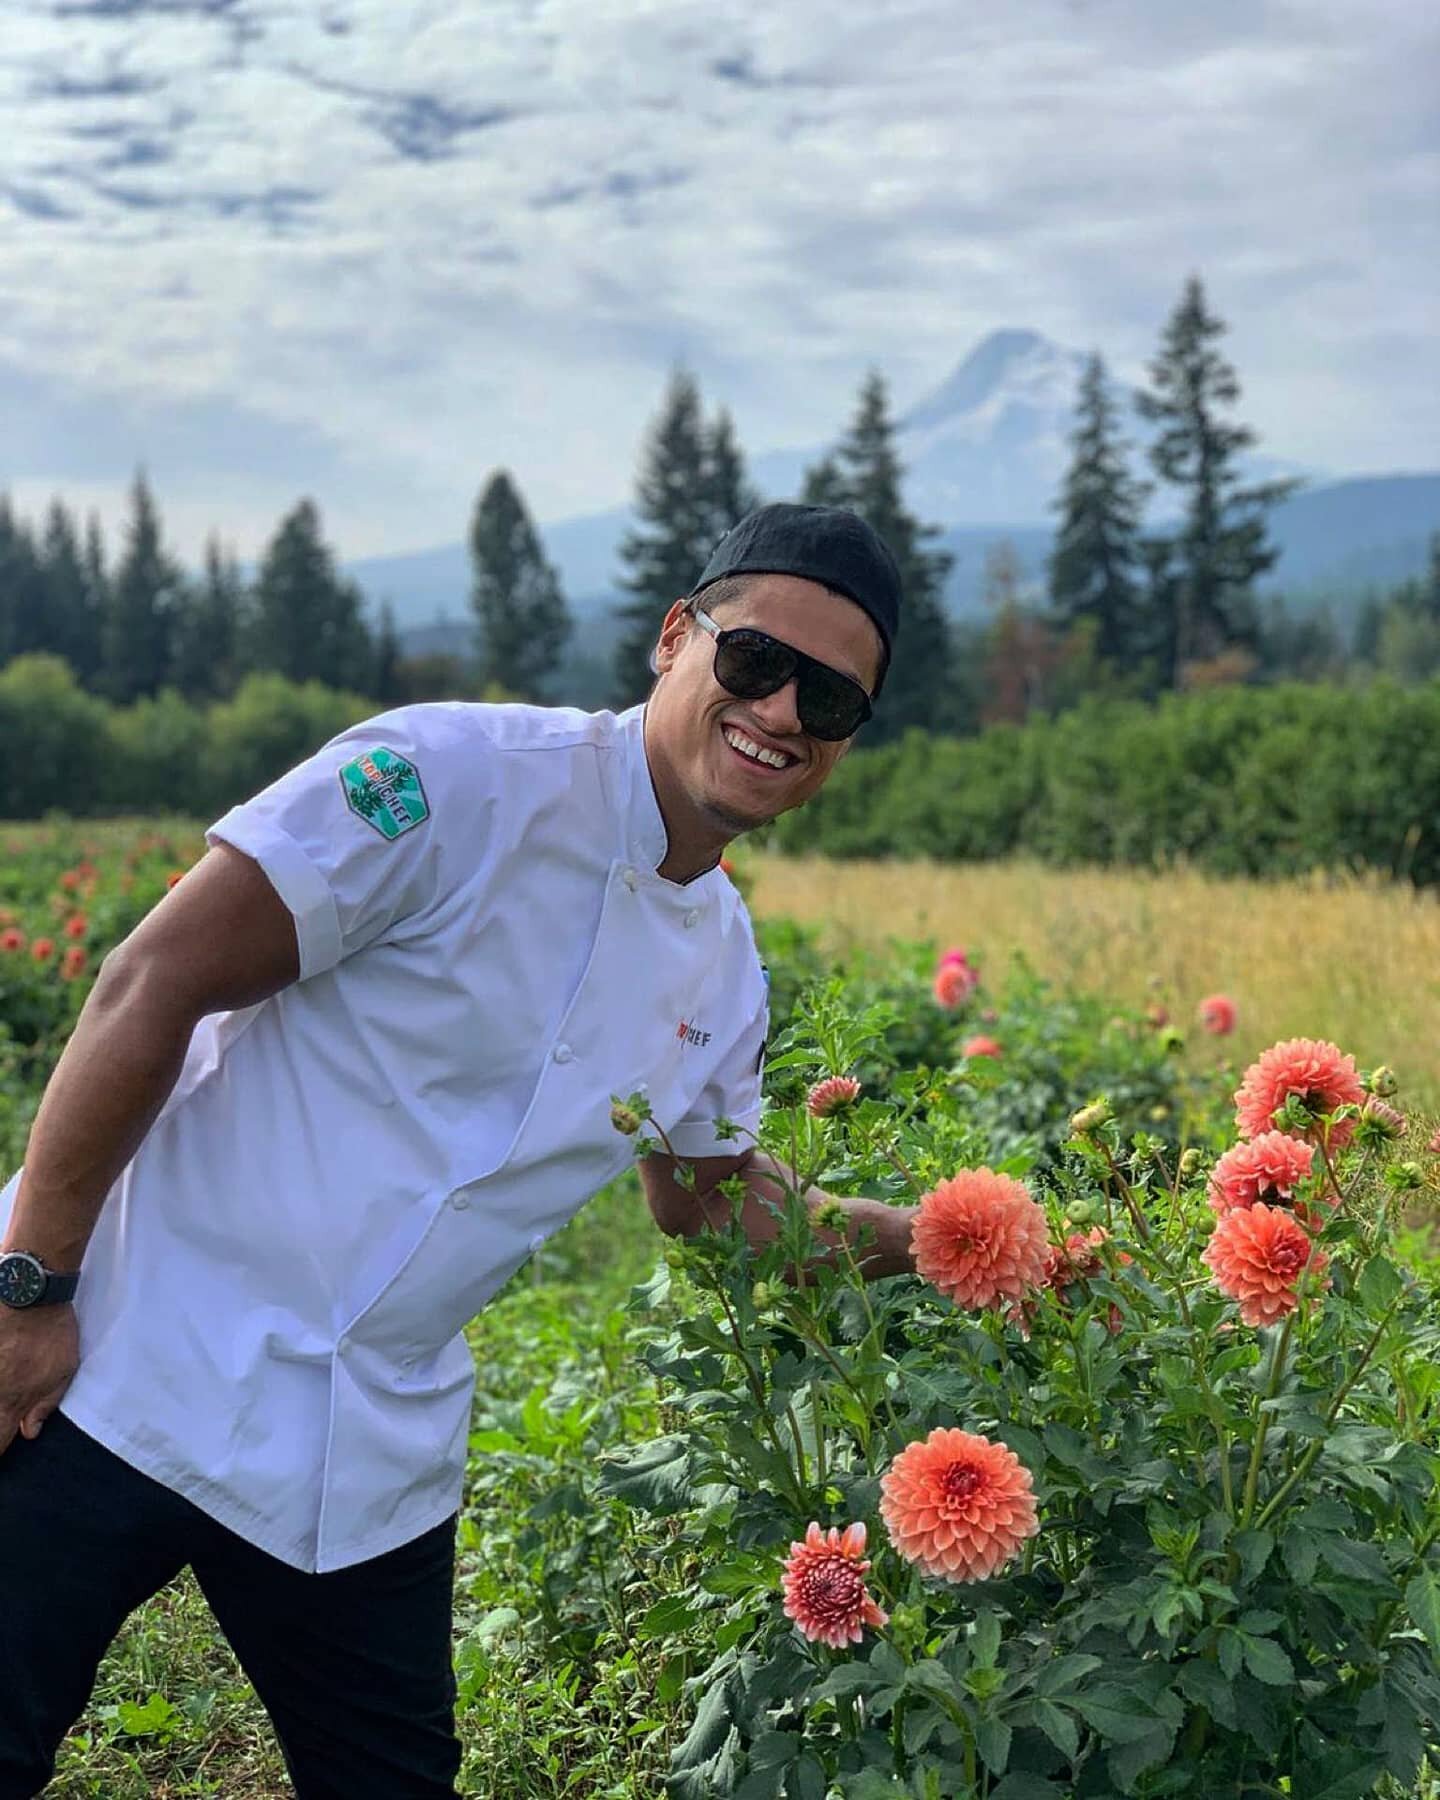 What a great episode to celebrate #earthday and #earth today. Oregon you are stunning and truly a gift to us all from mother earth. This challenge we all get thrown into a fun loop. Tune in tonight @bravotopchef @bravotv 8/7ct to see what me and the 